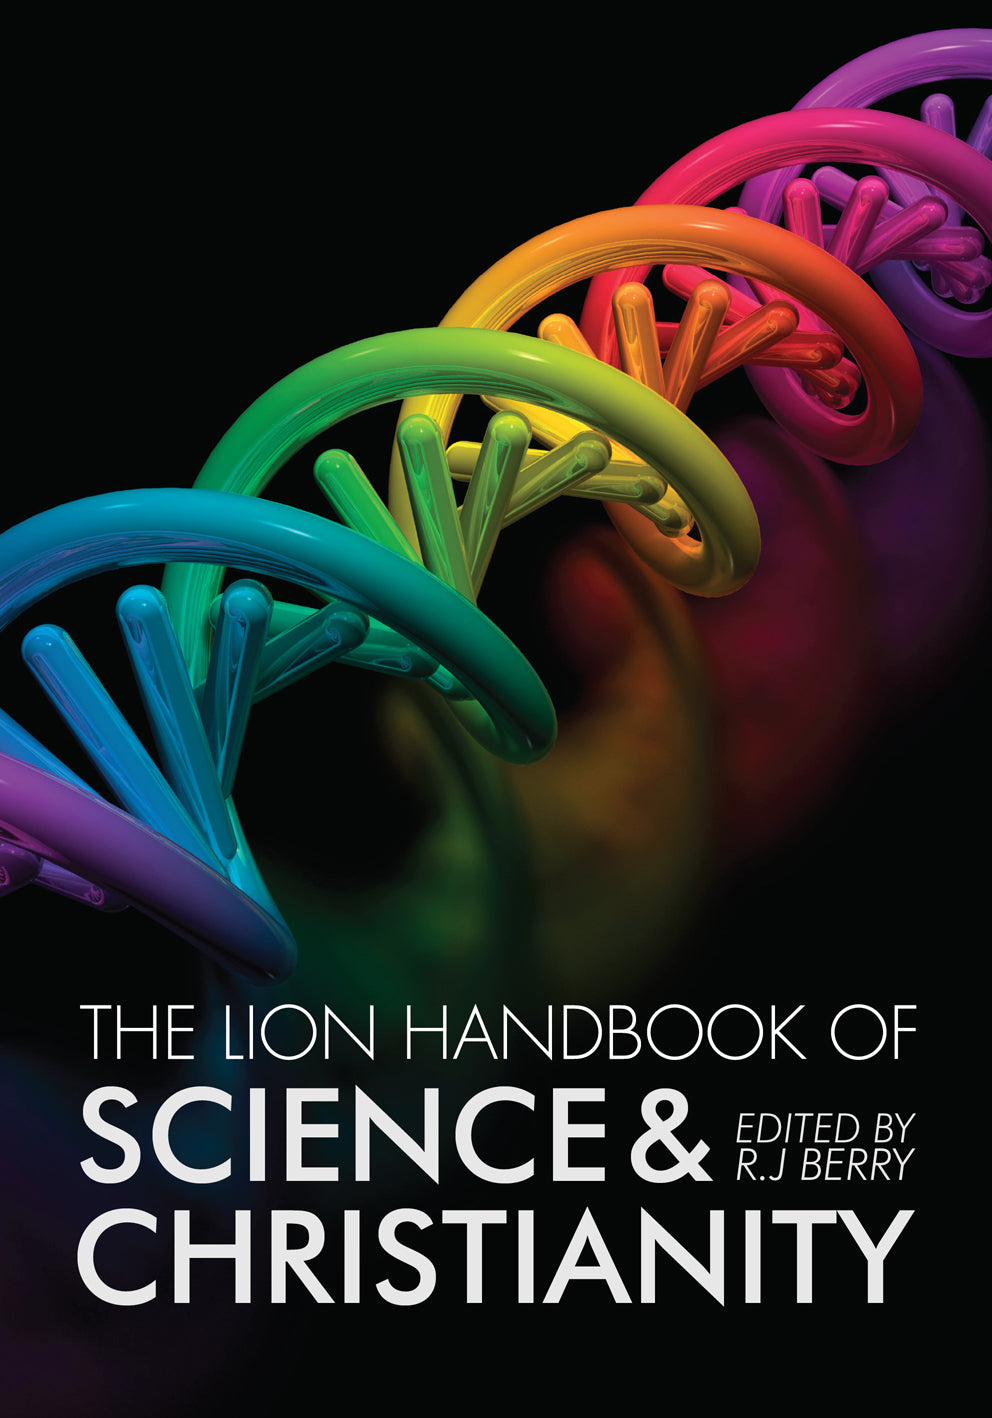 Image of The Lion Handbook of Science and Christianity other